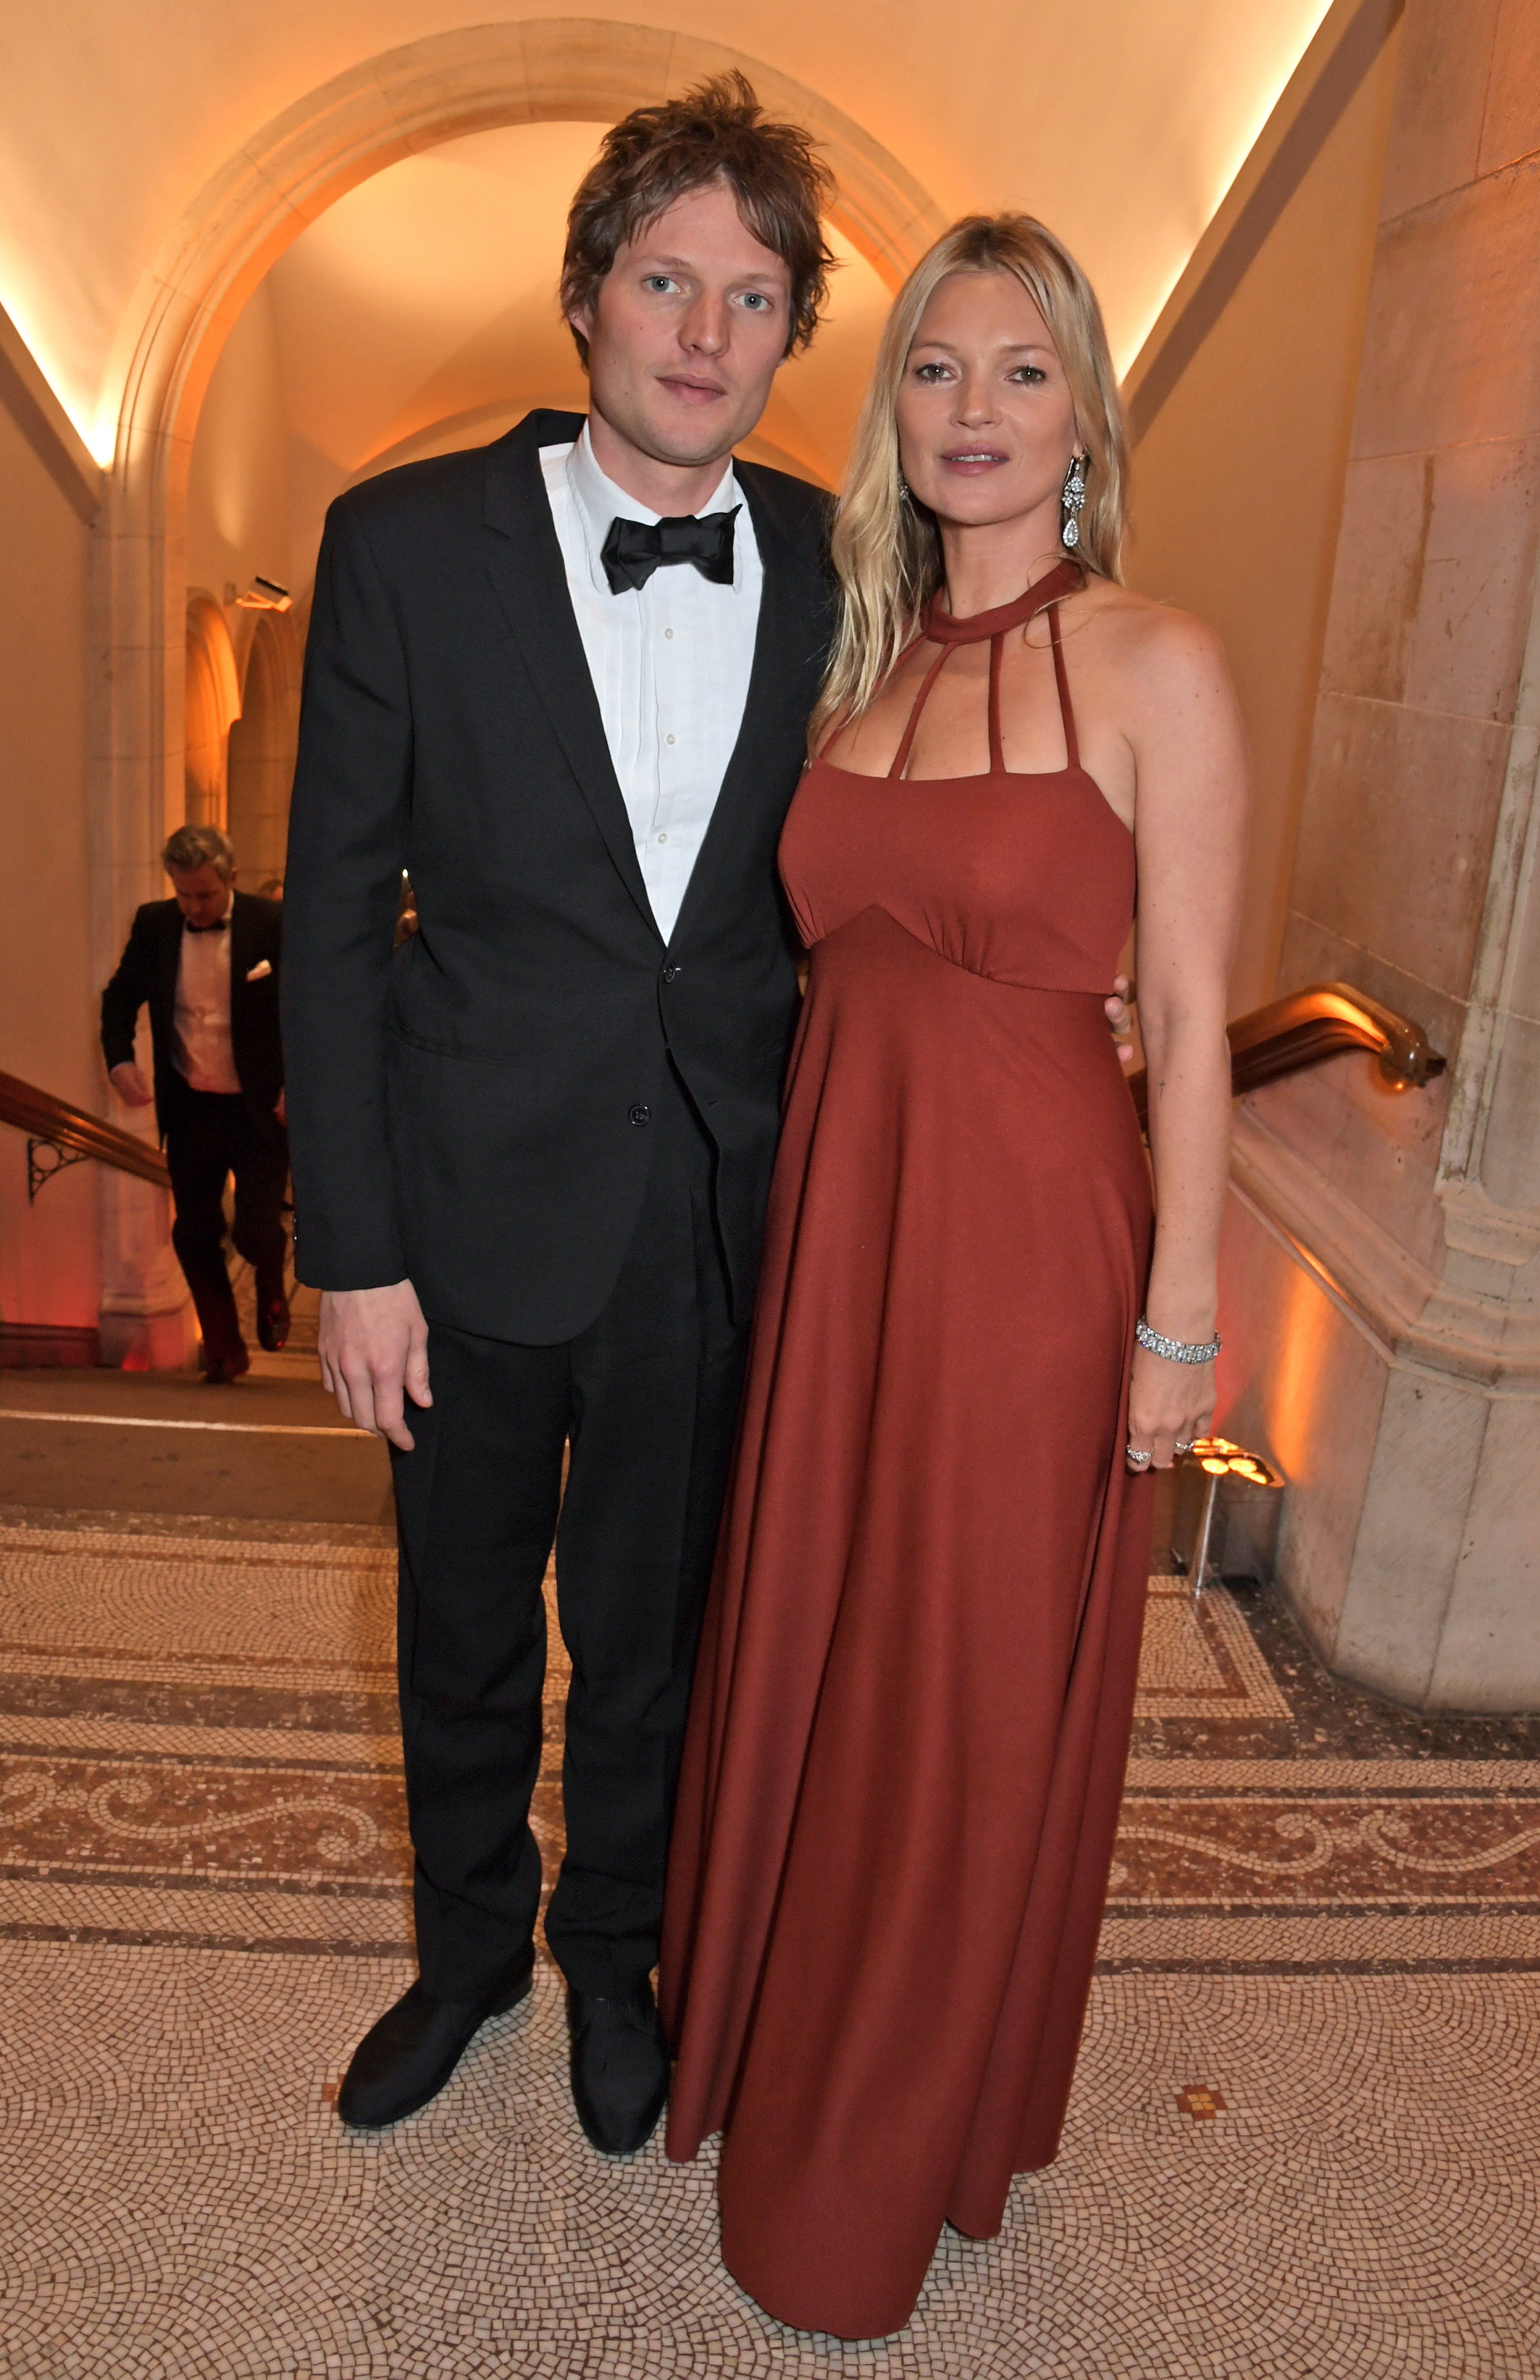 Count Nikolai von Bismarck and Kate Moss attend The Portrait Gala 2019 at the National Portrait Gallery in March 2019, in London, England. Photo: Getty Images